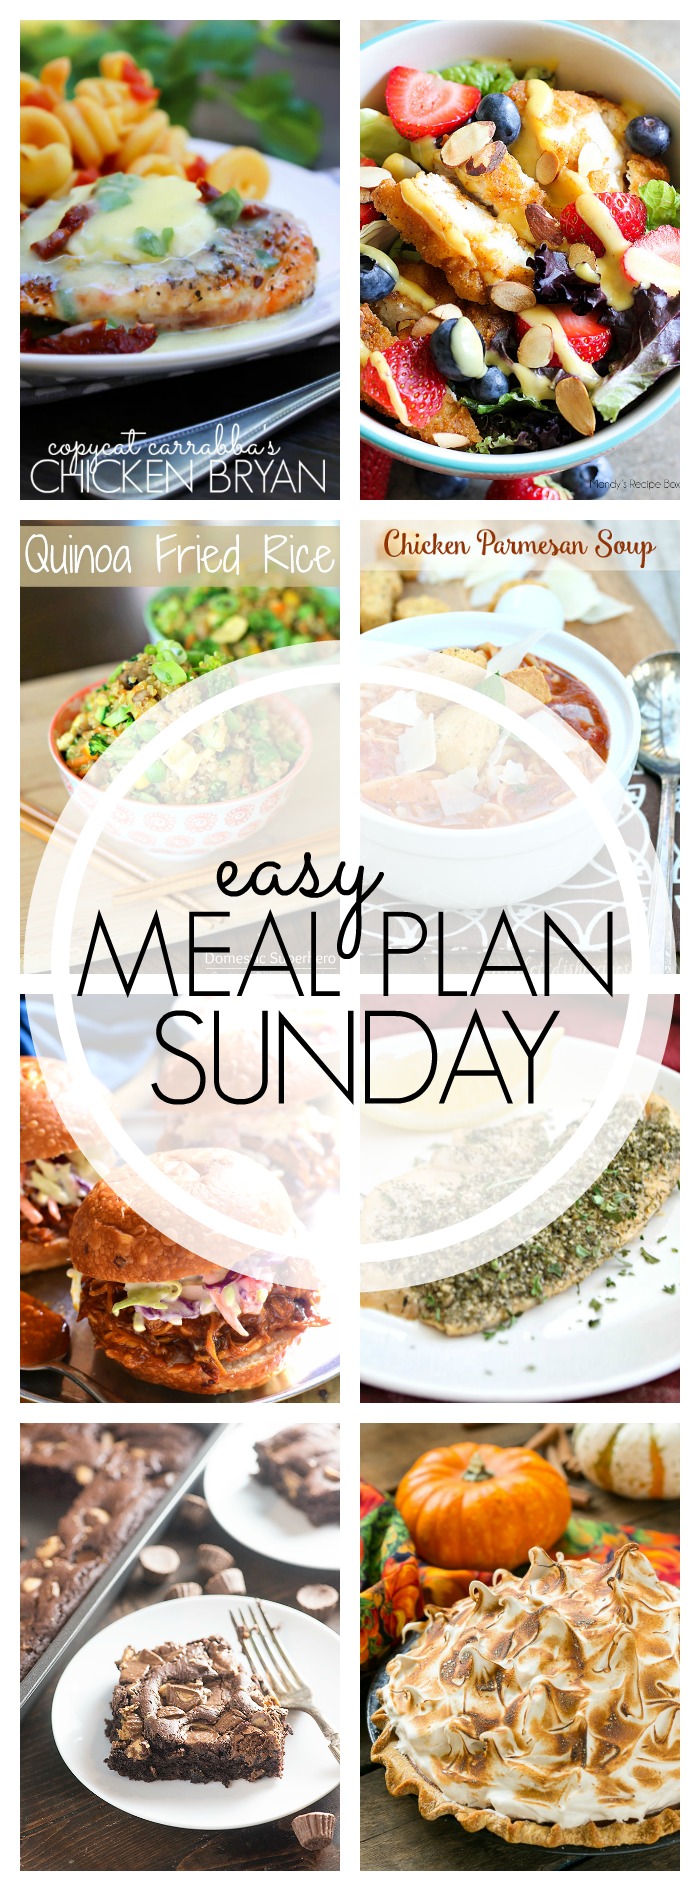 Easy Meal Plan Sunday #64